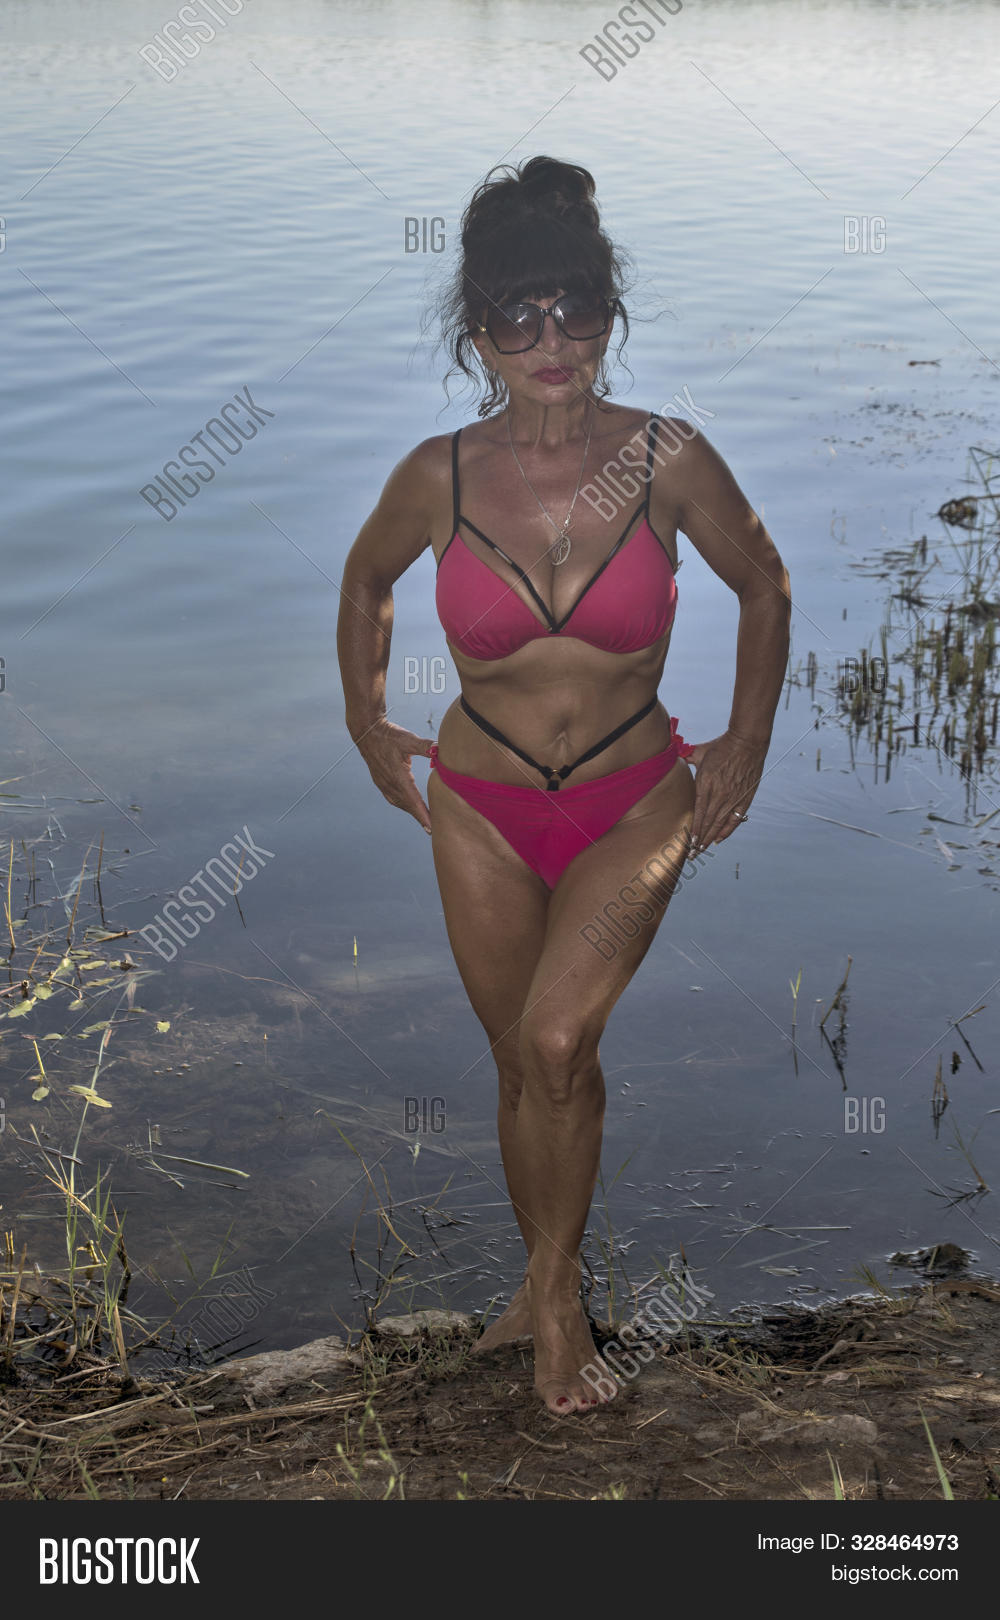 diana bosheh recommends middle aged woman bikini pic